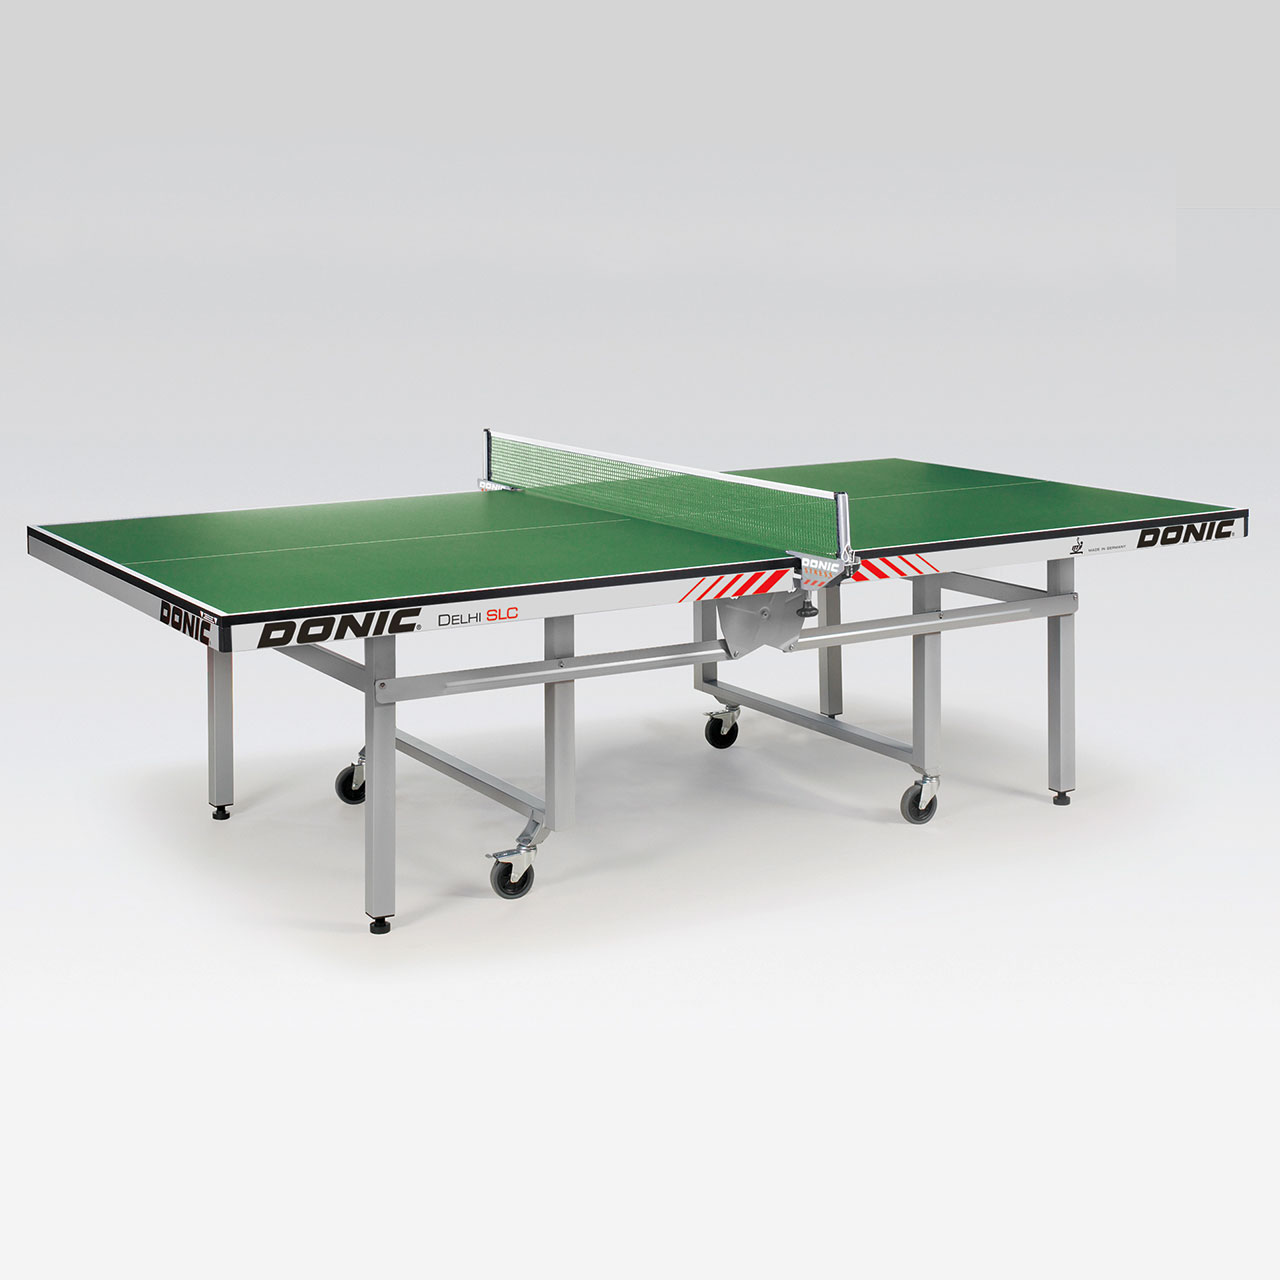 Table Delhi | SLC Tennis Jarvis Sports - Table Donic